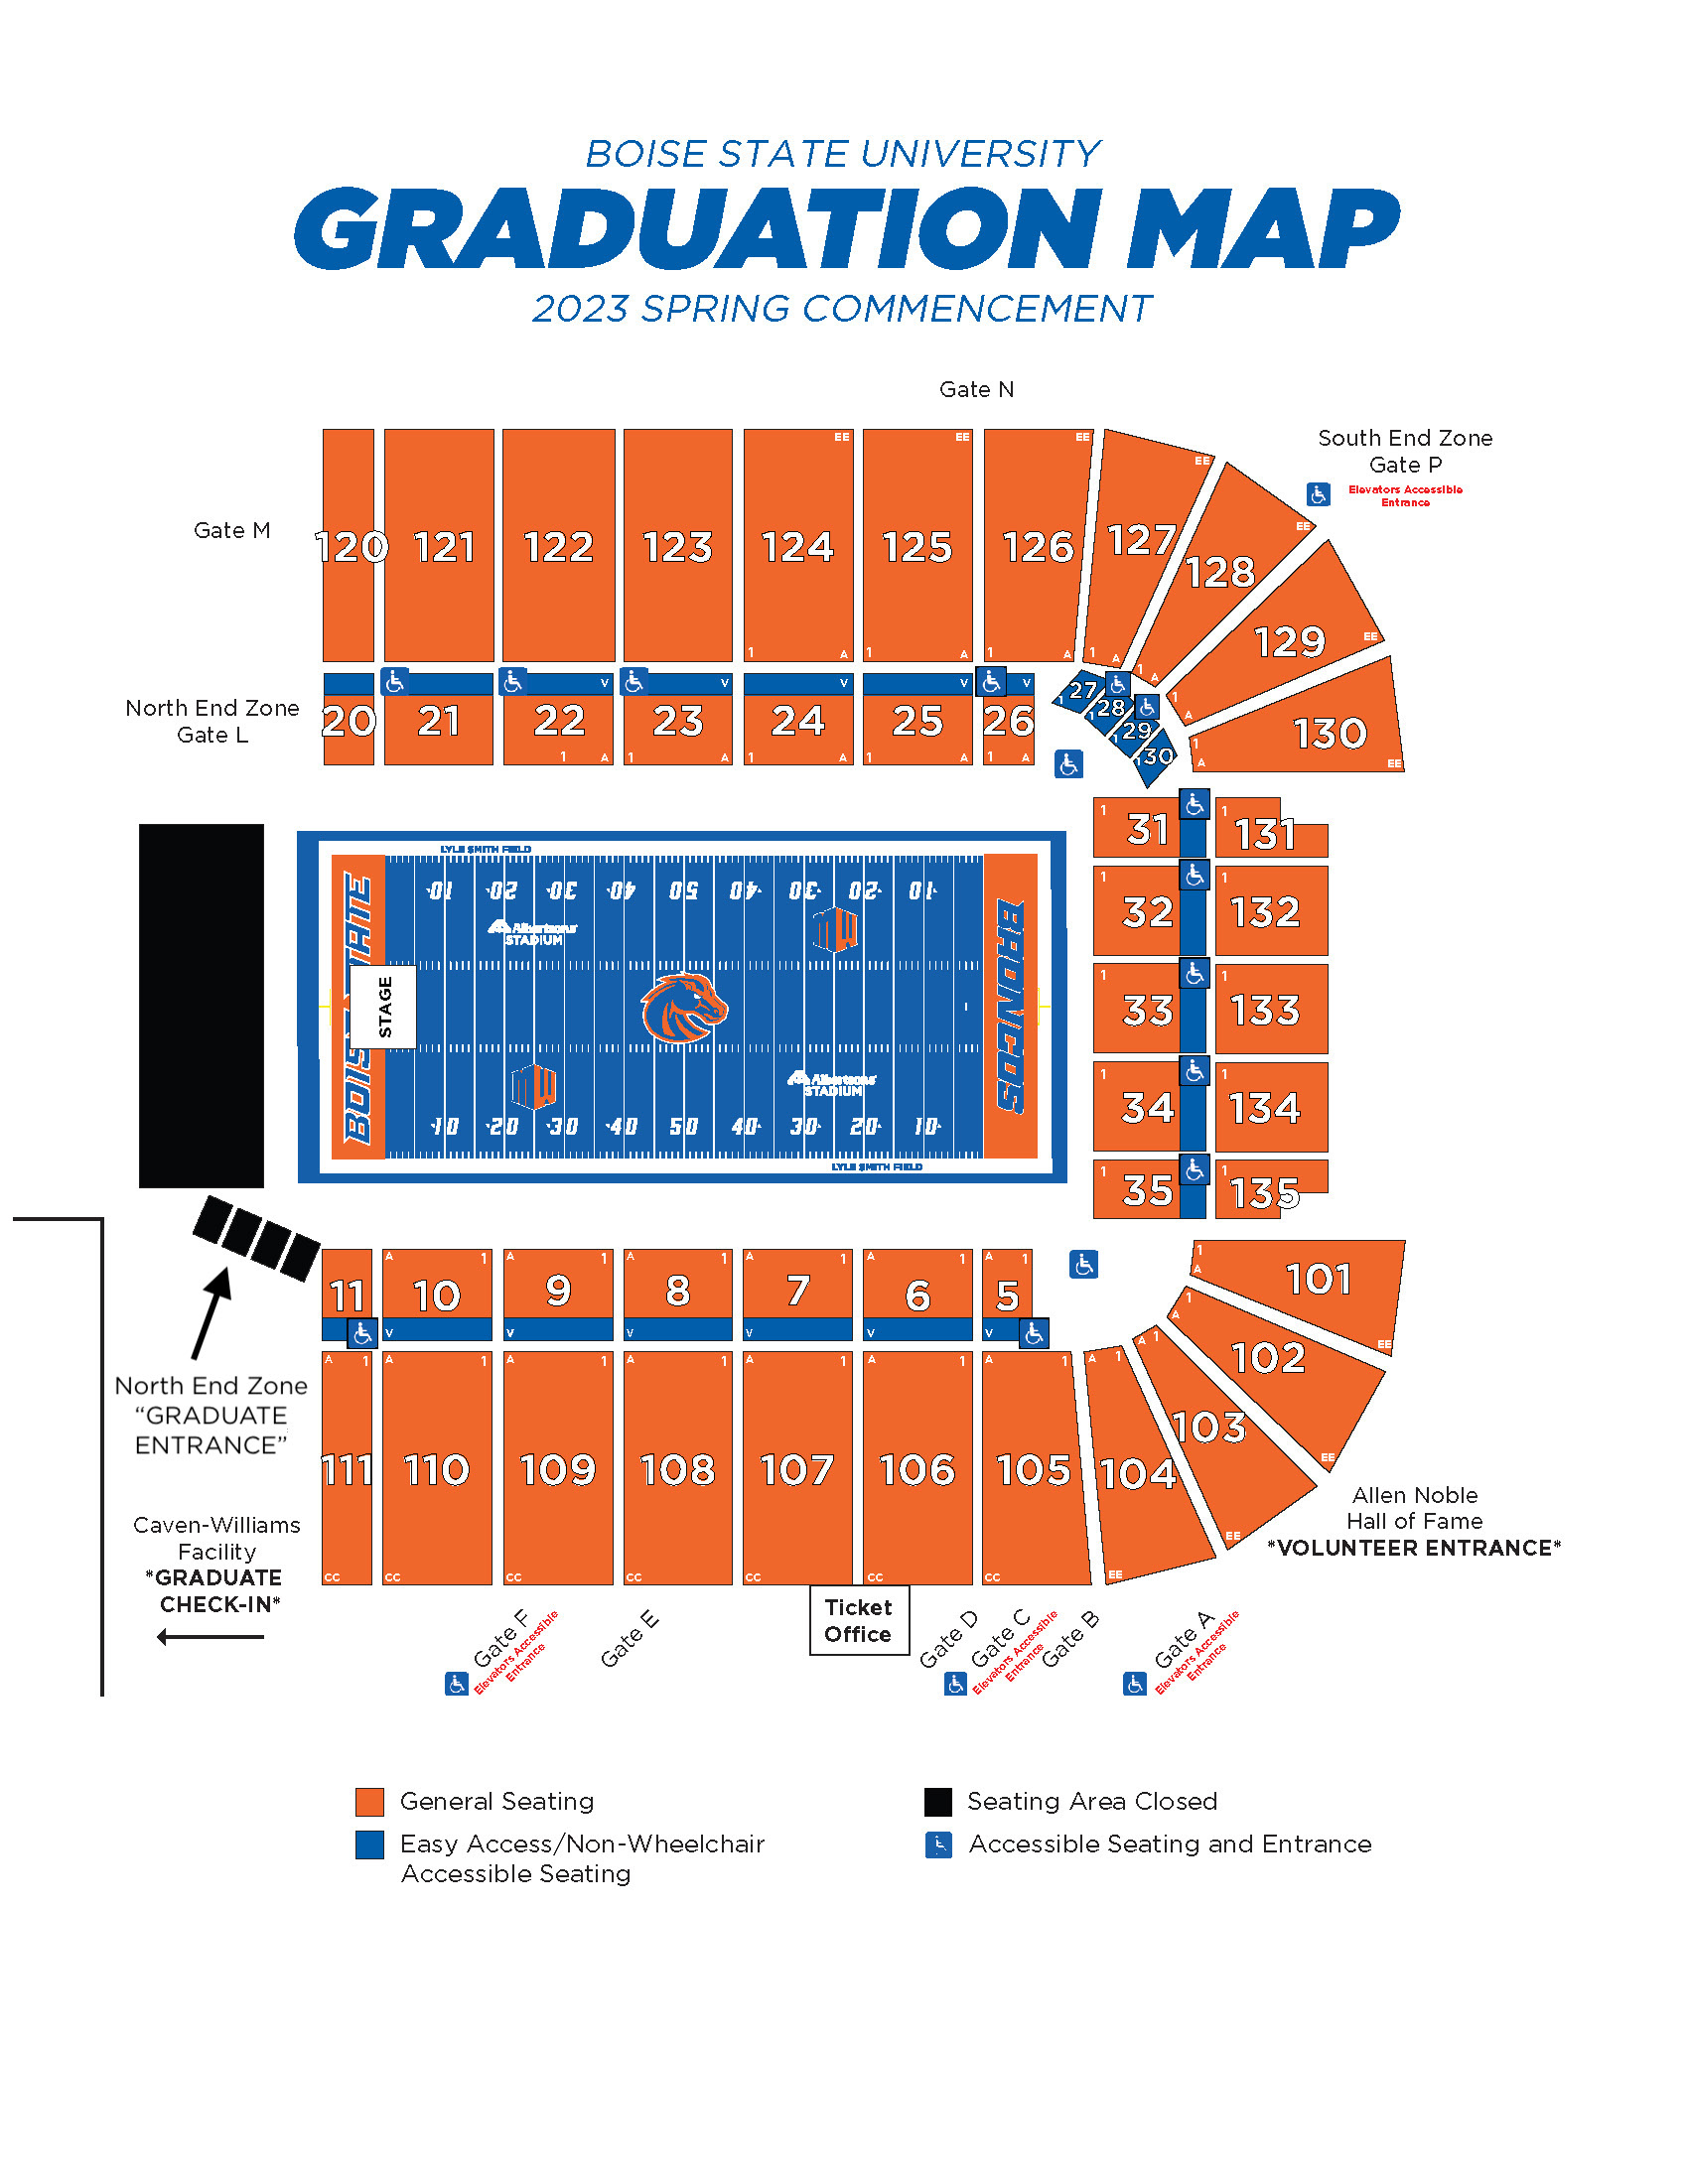 Graphic map of Albertsons stadium seating areas and entrances